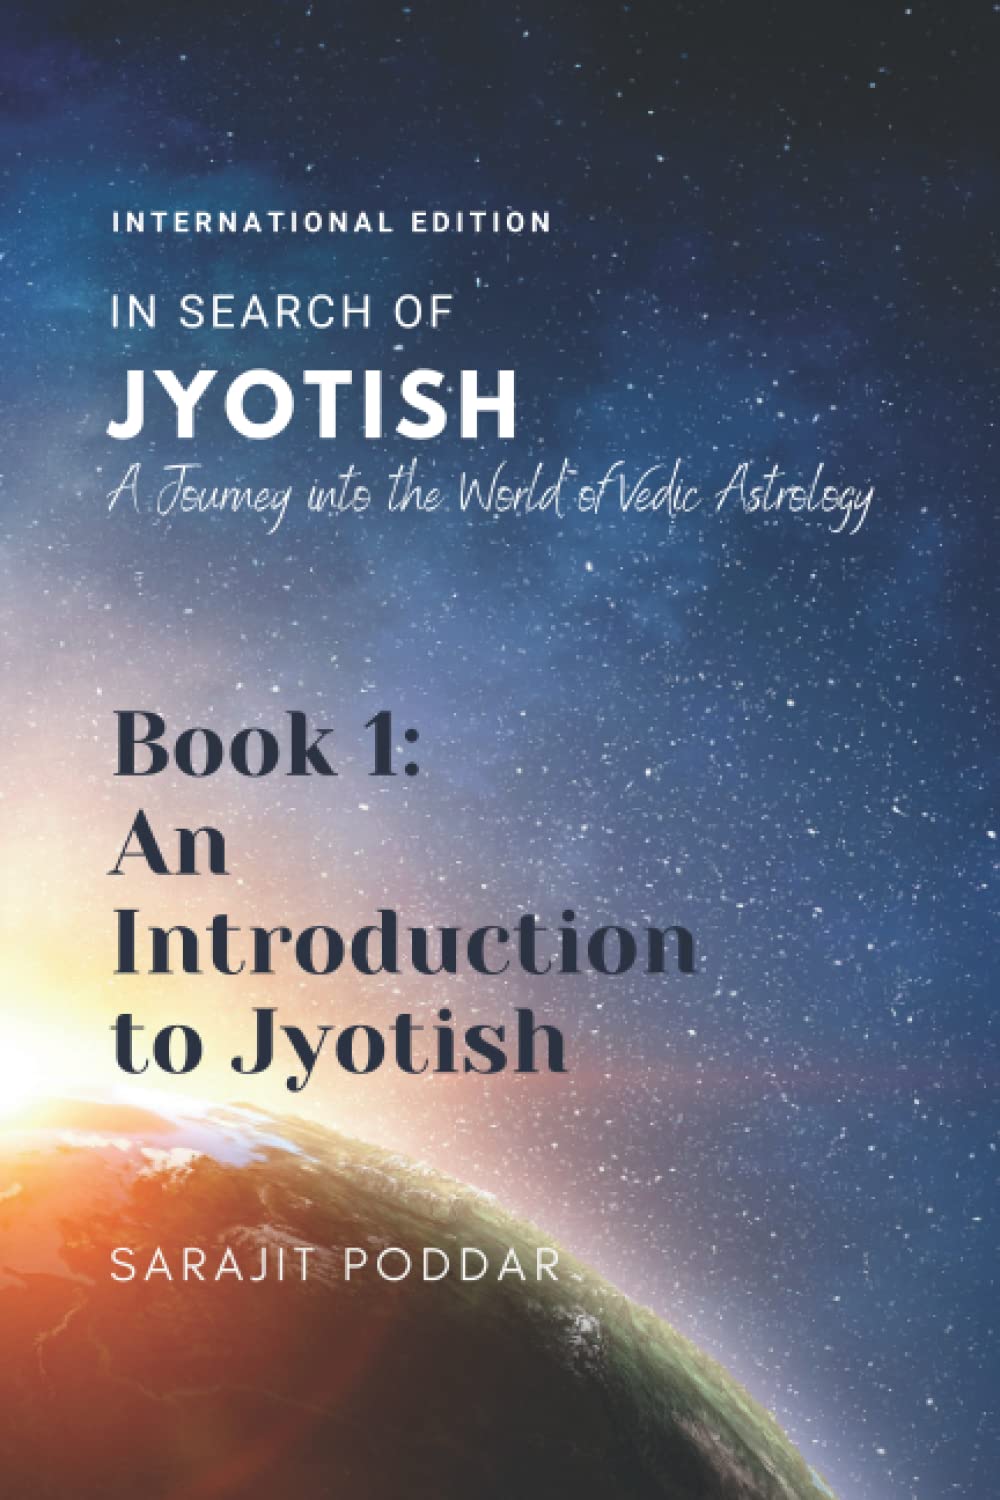 An Introduction to Jyotish: A Journey into the World of Jyotish